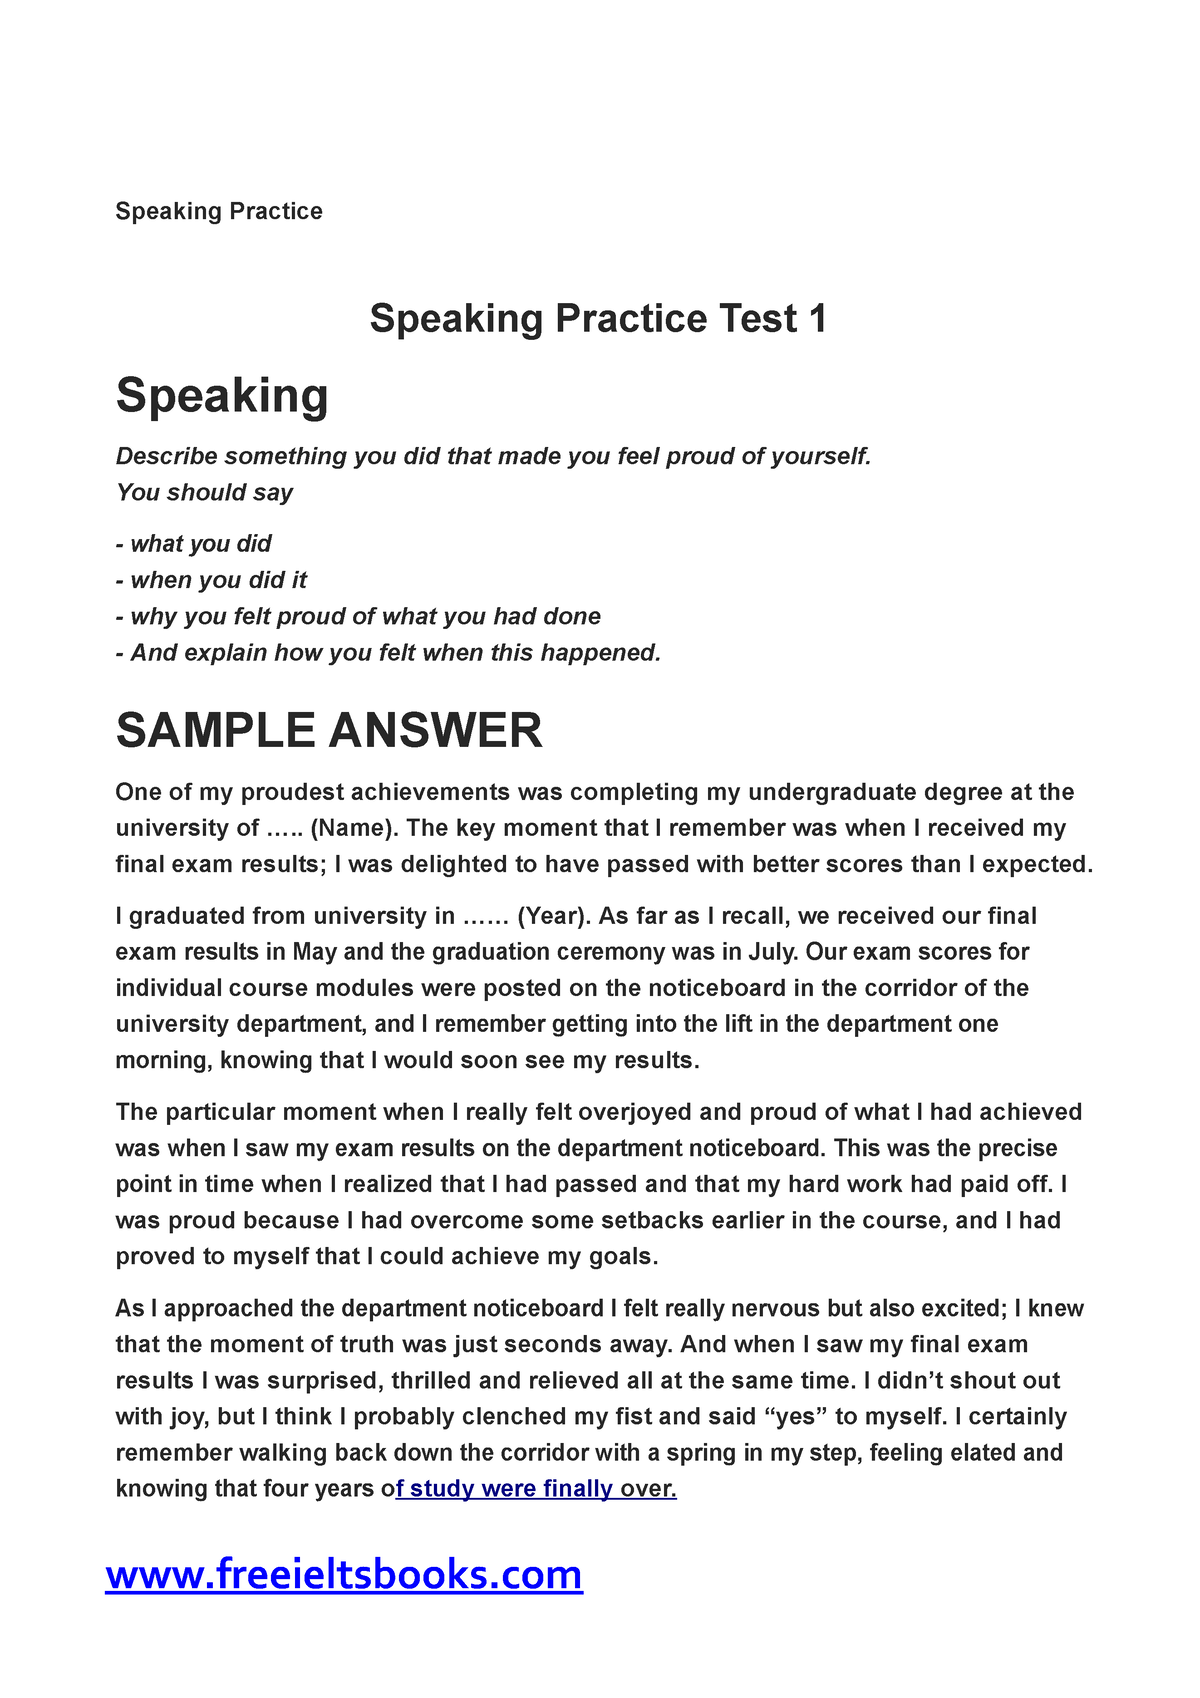 Ielts Speaking Complete Practice Tests With Answers – Test 1 - Speaking ...